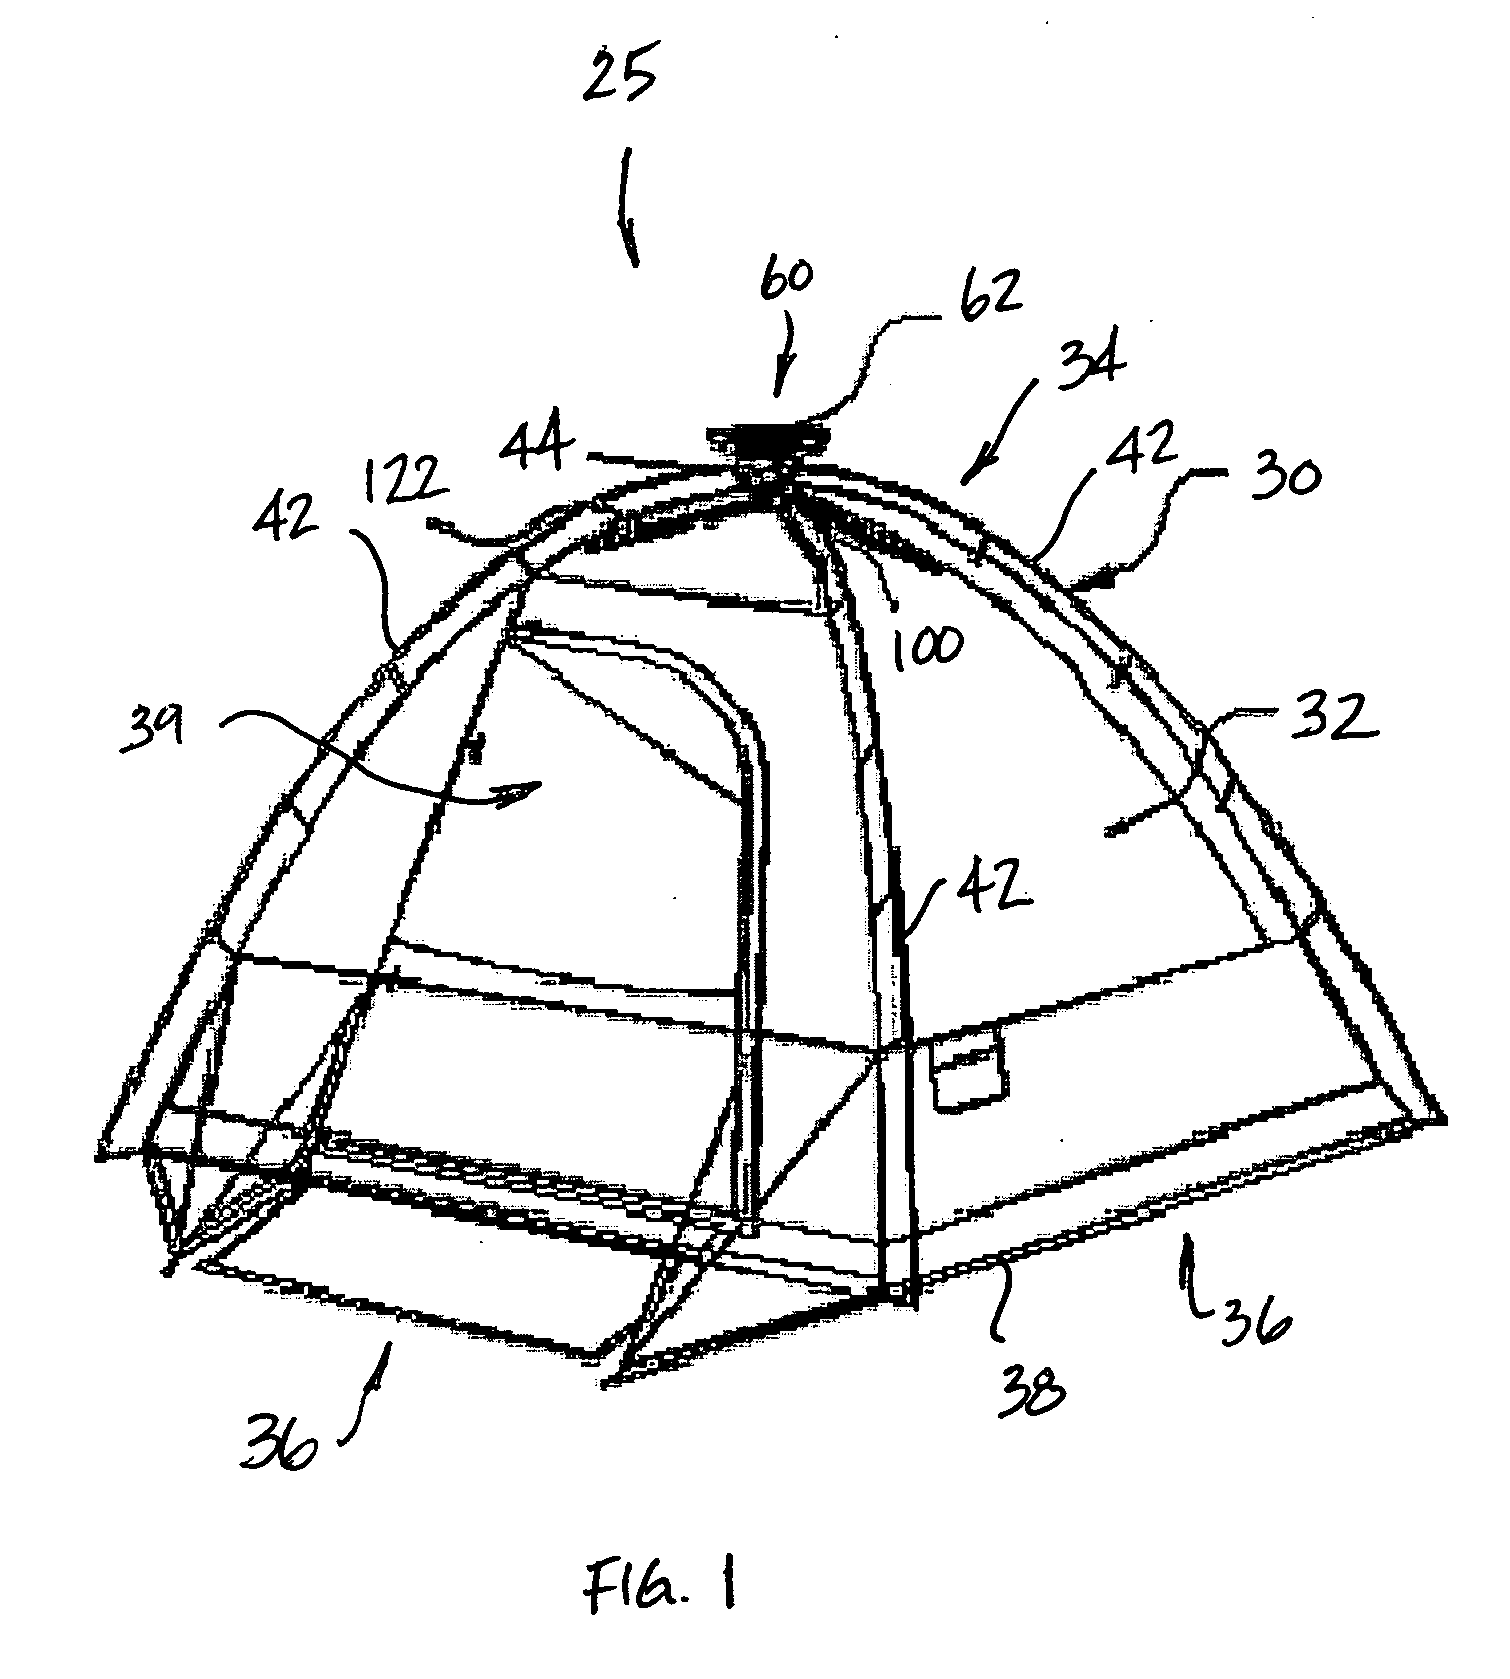 Apparatus and method for lighting a collapsible structure